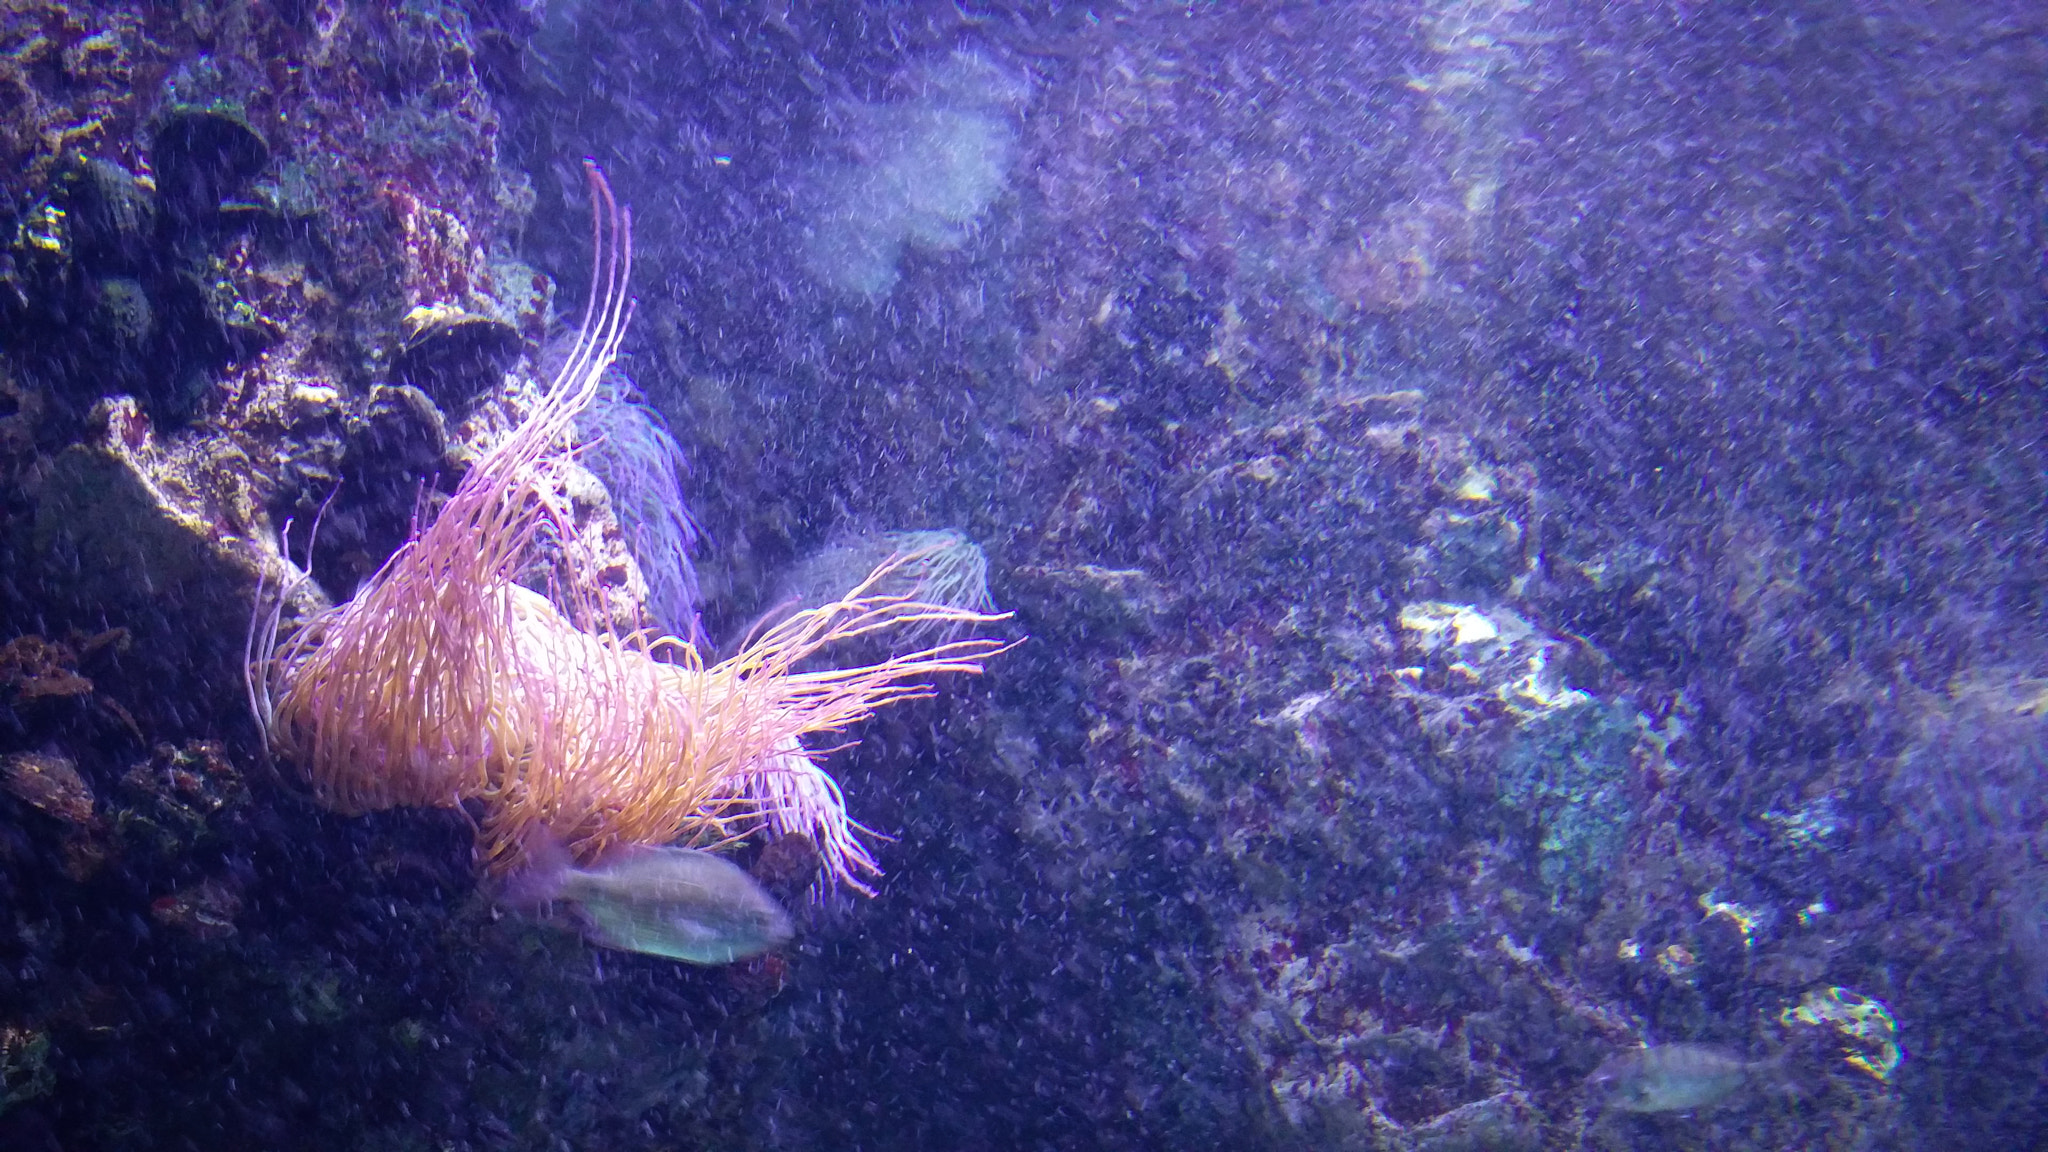 OnePlus 2 sample photo. Under the sea photography